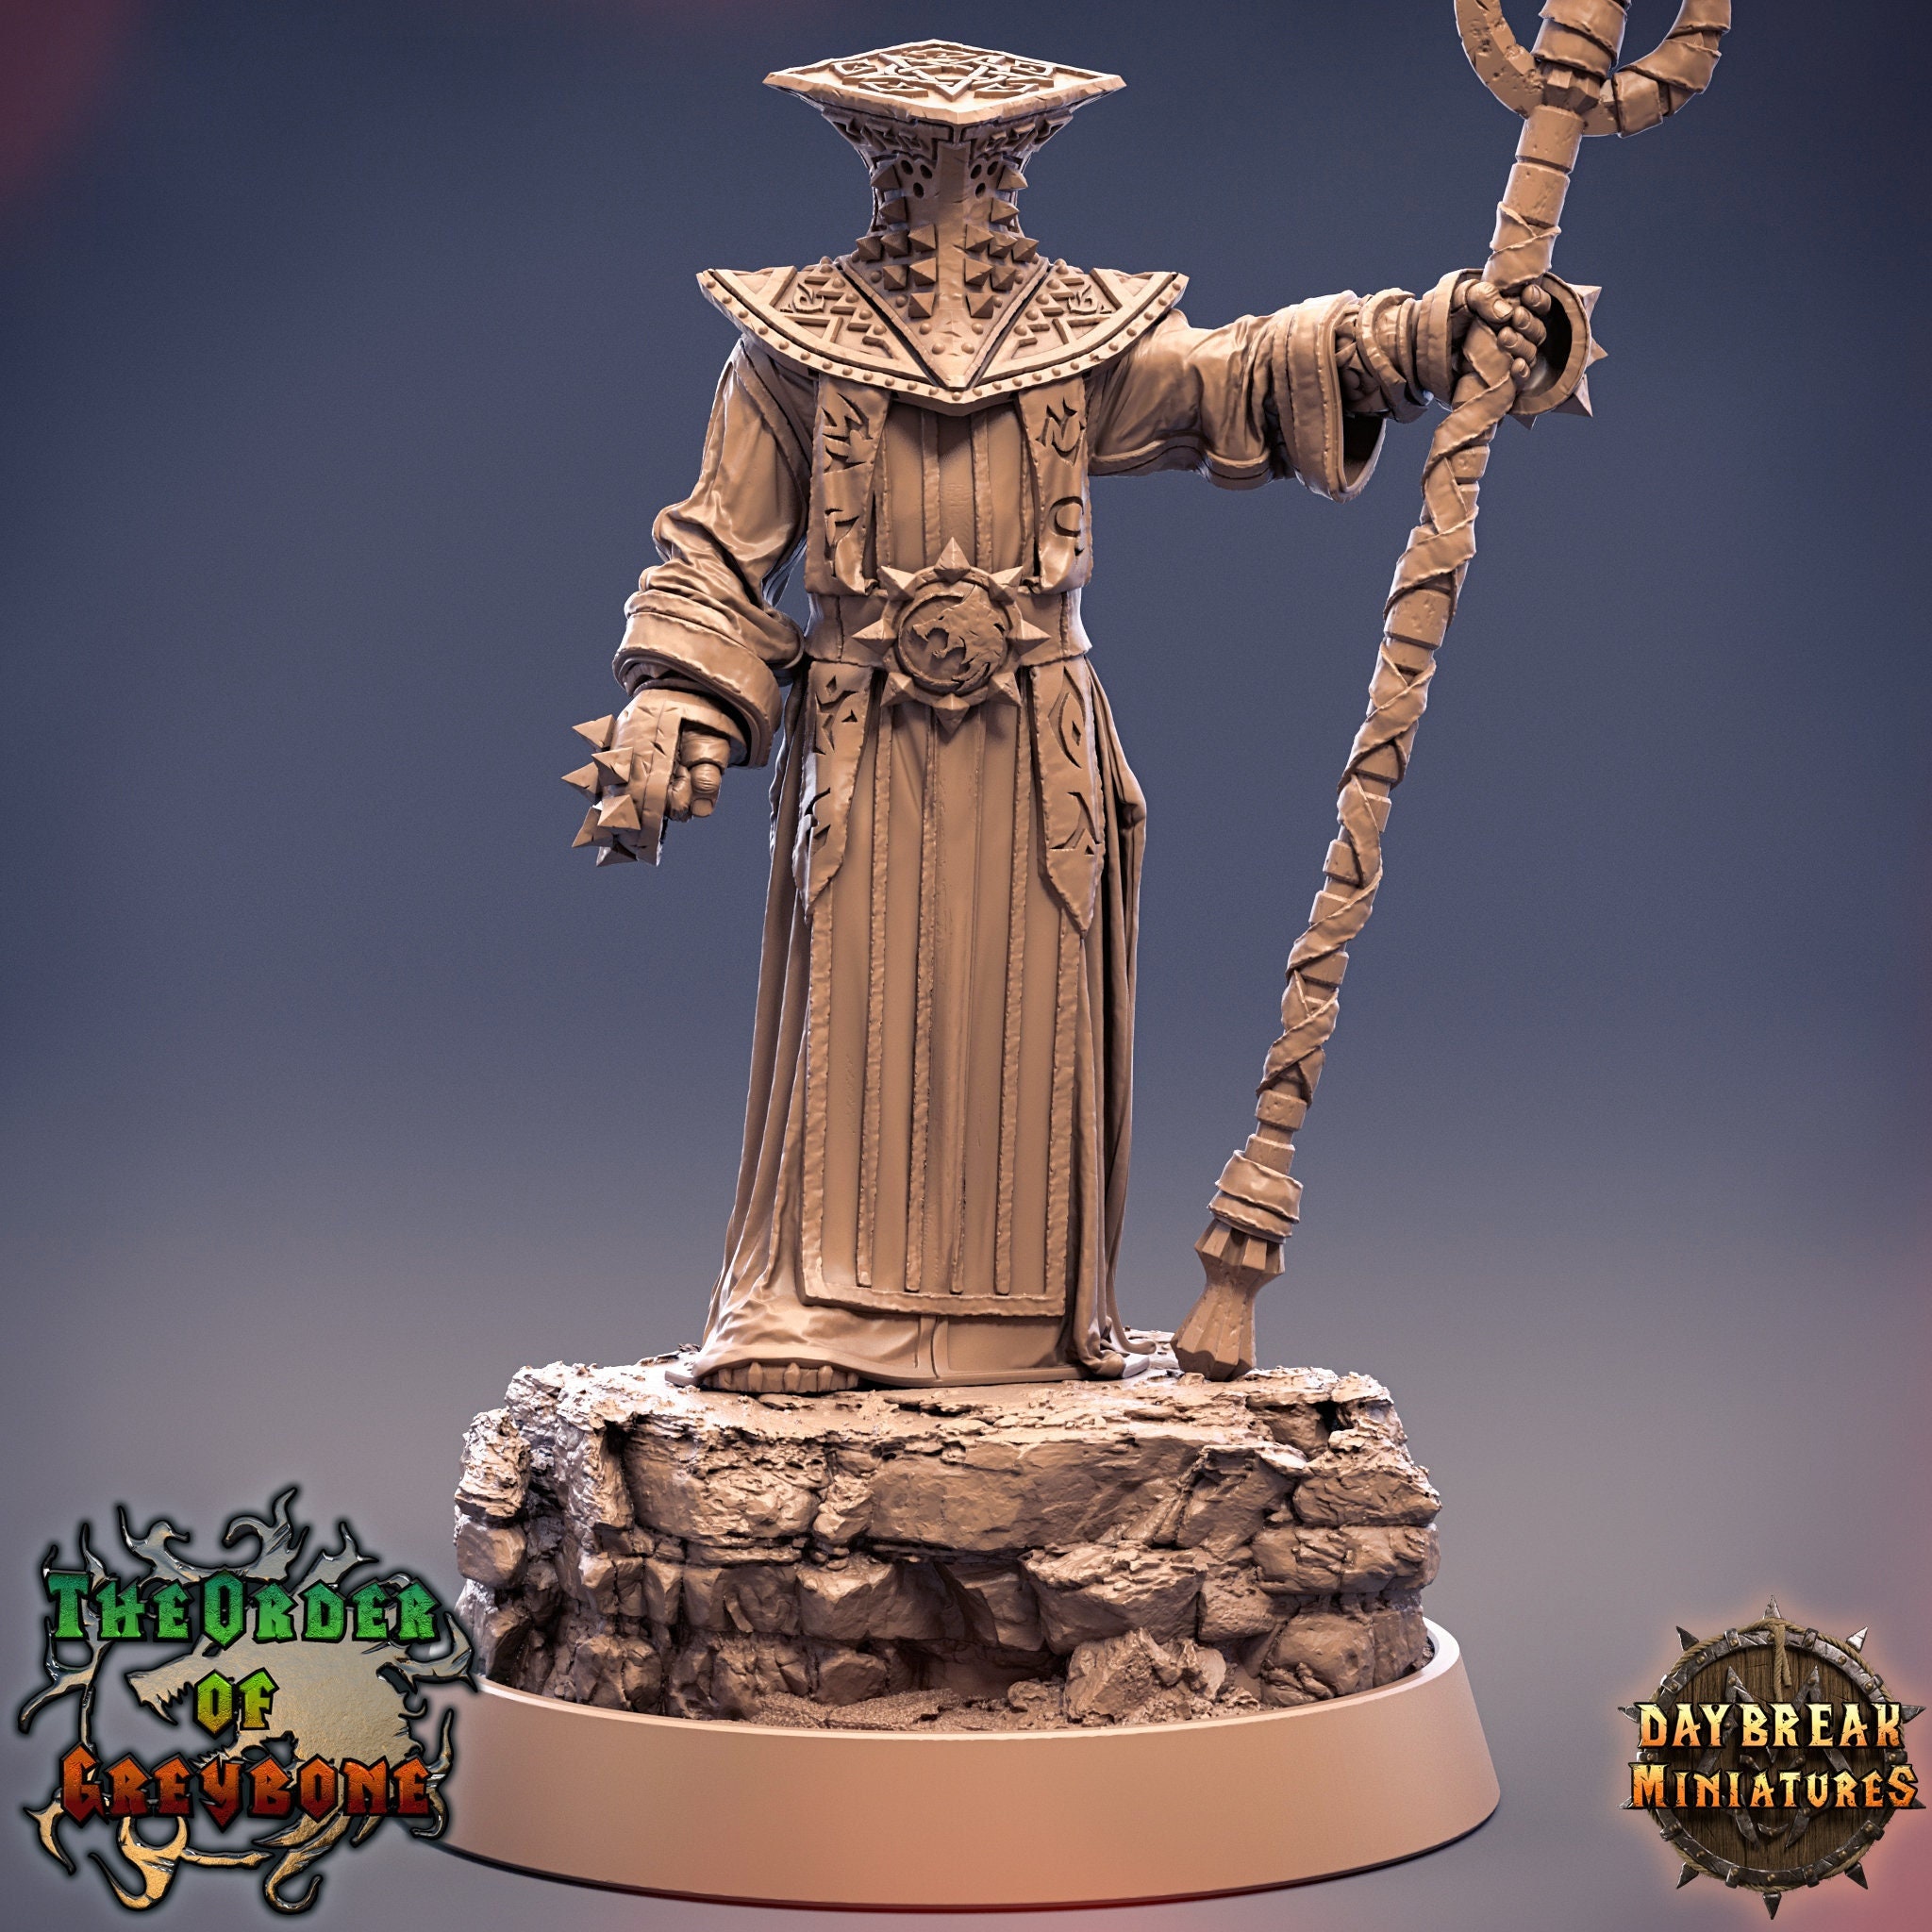 Dark Mage of Chaos Miniatures for Tabletop games like D&D or Warhammer| Daybreak Dark Cleric DnD Miniature Mage